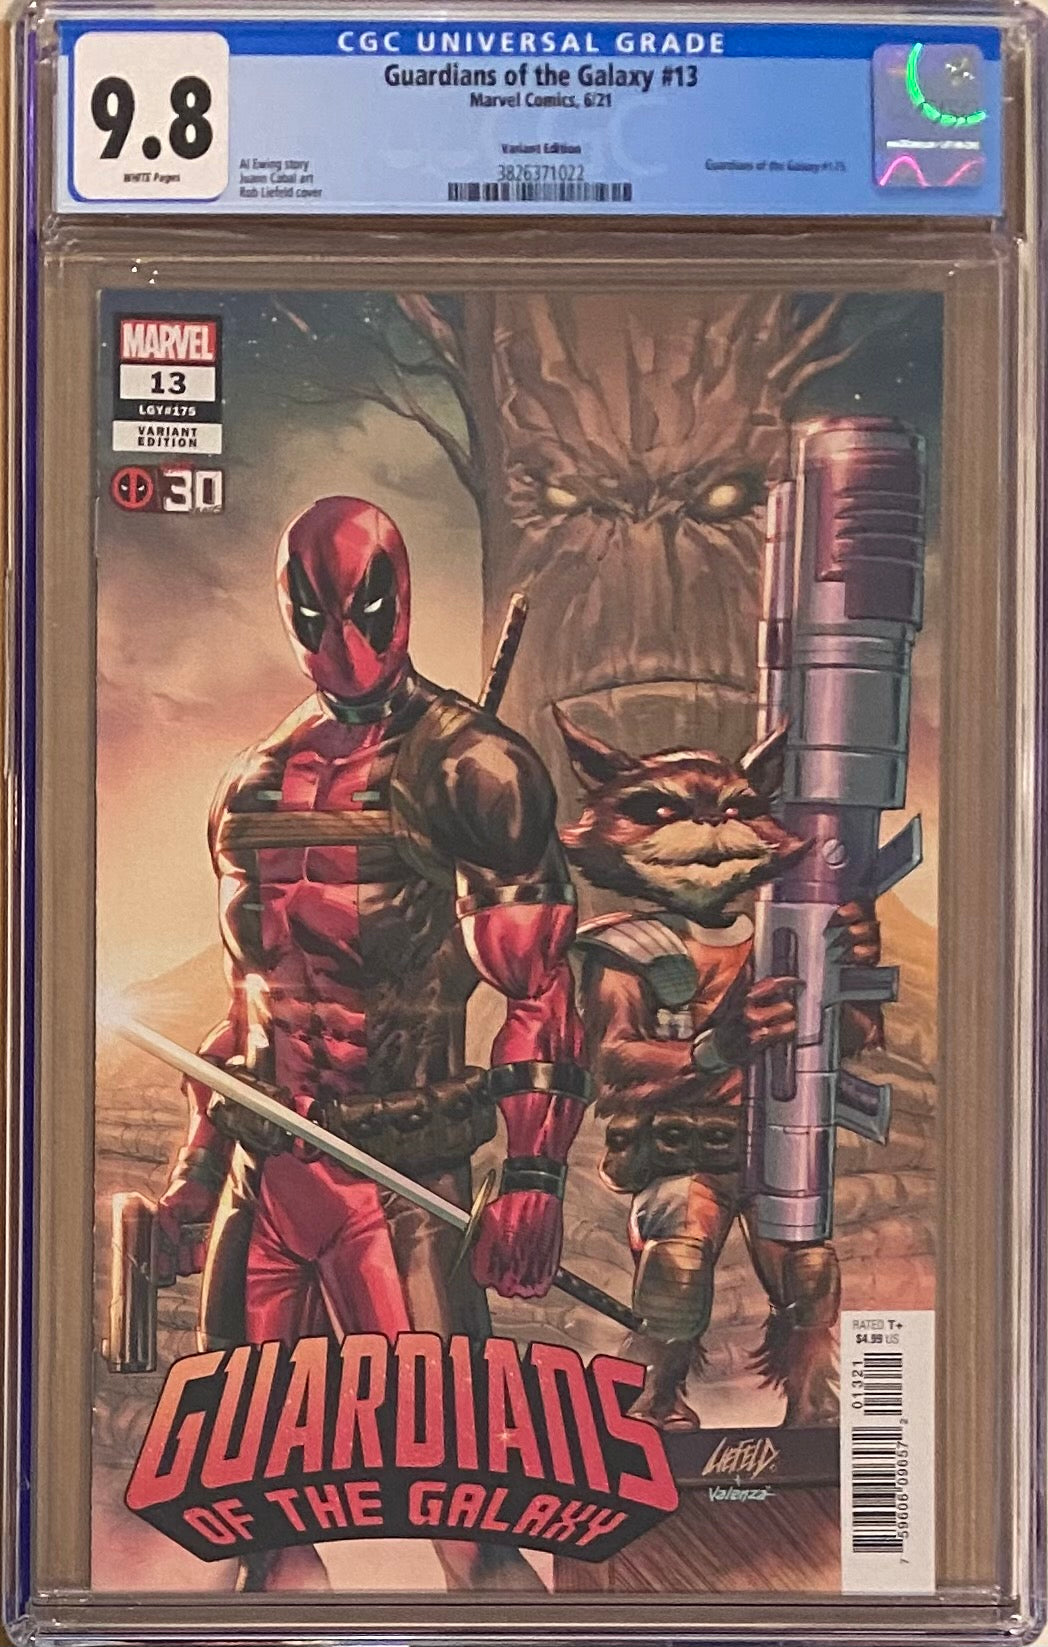 Guardians of the Galaxy #13 Liefeld Deadpool 30th Anniversary Variant CGC 9.8